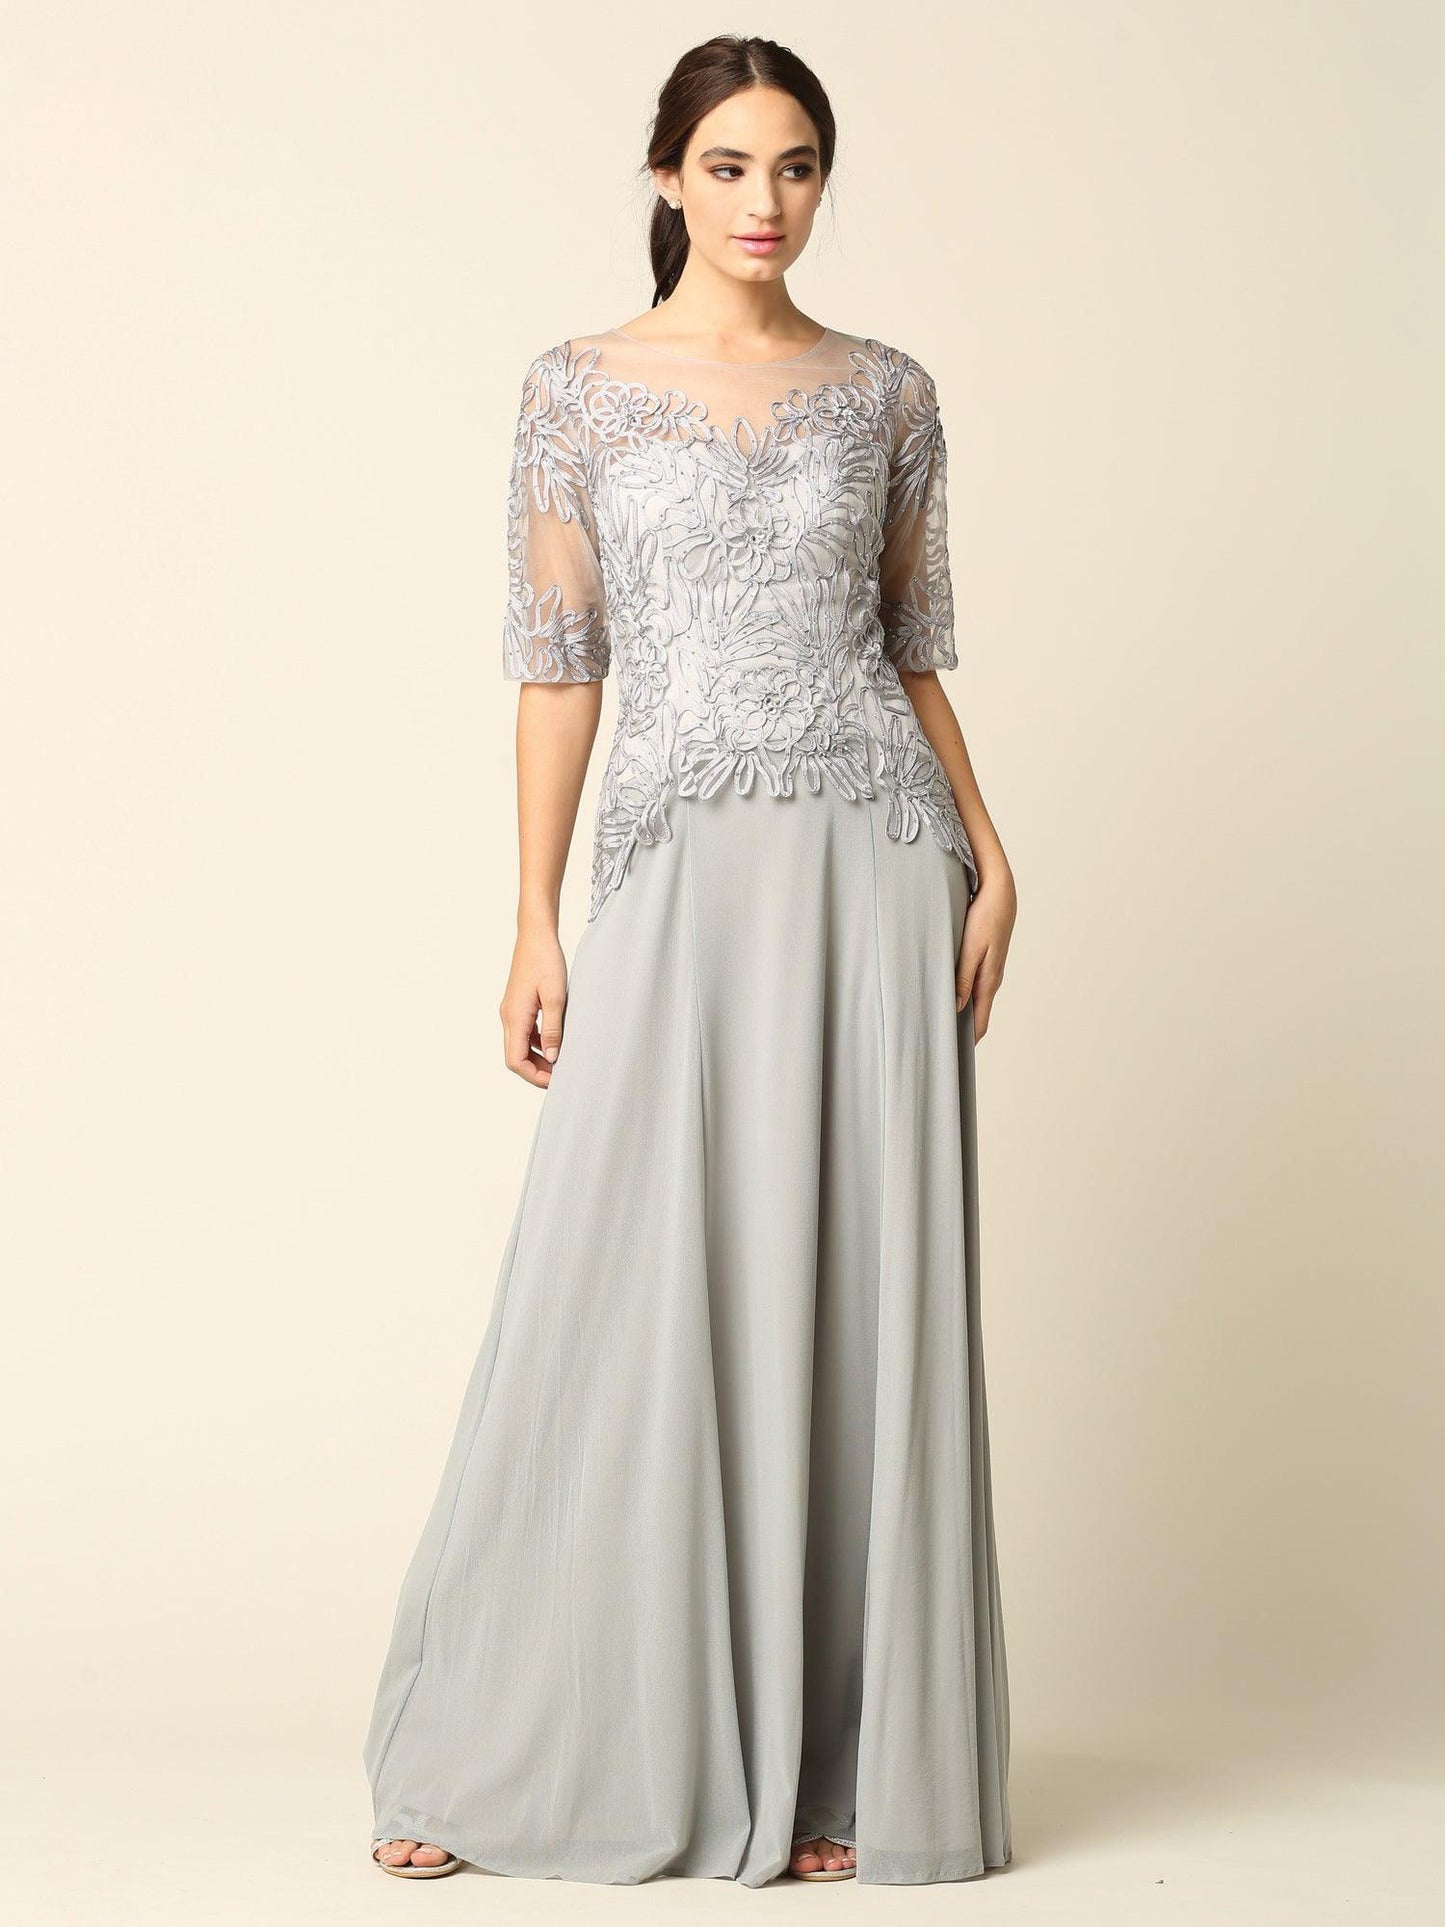 Mother of the Bride Long Formal Embroidered Dress Sale - The Dress Outlet